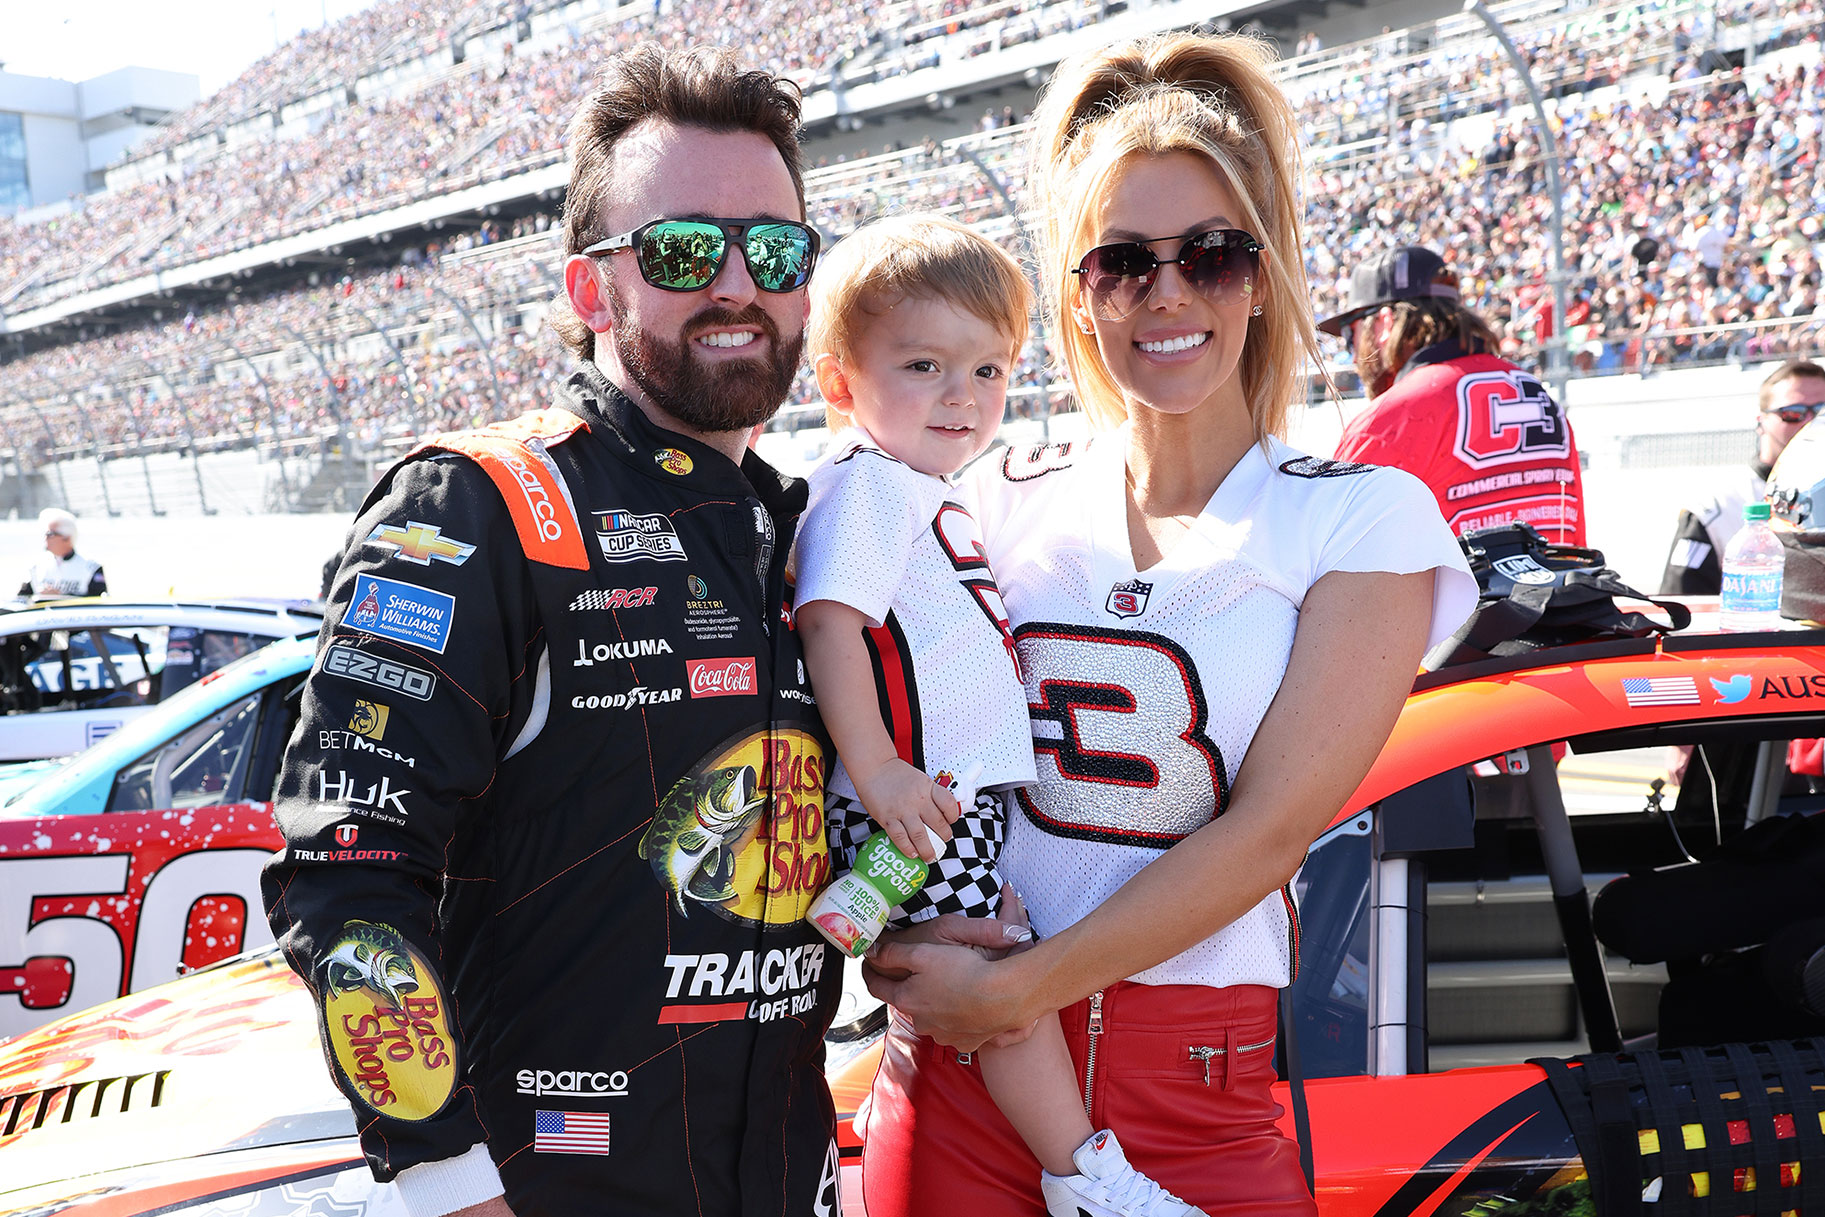 Austin Dillon with his wife and child, posing at a nascar event